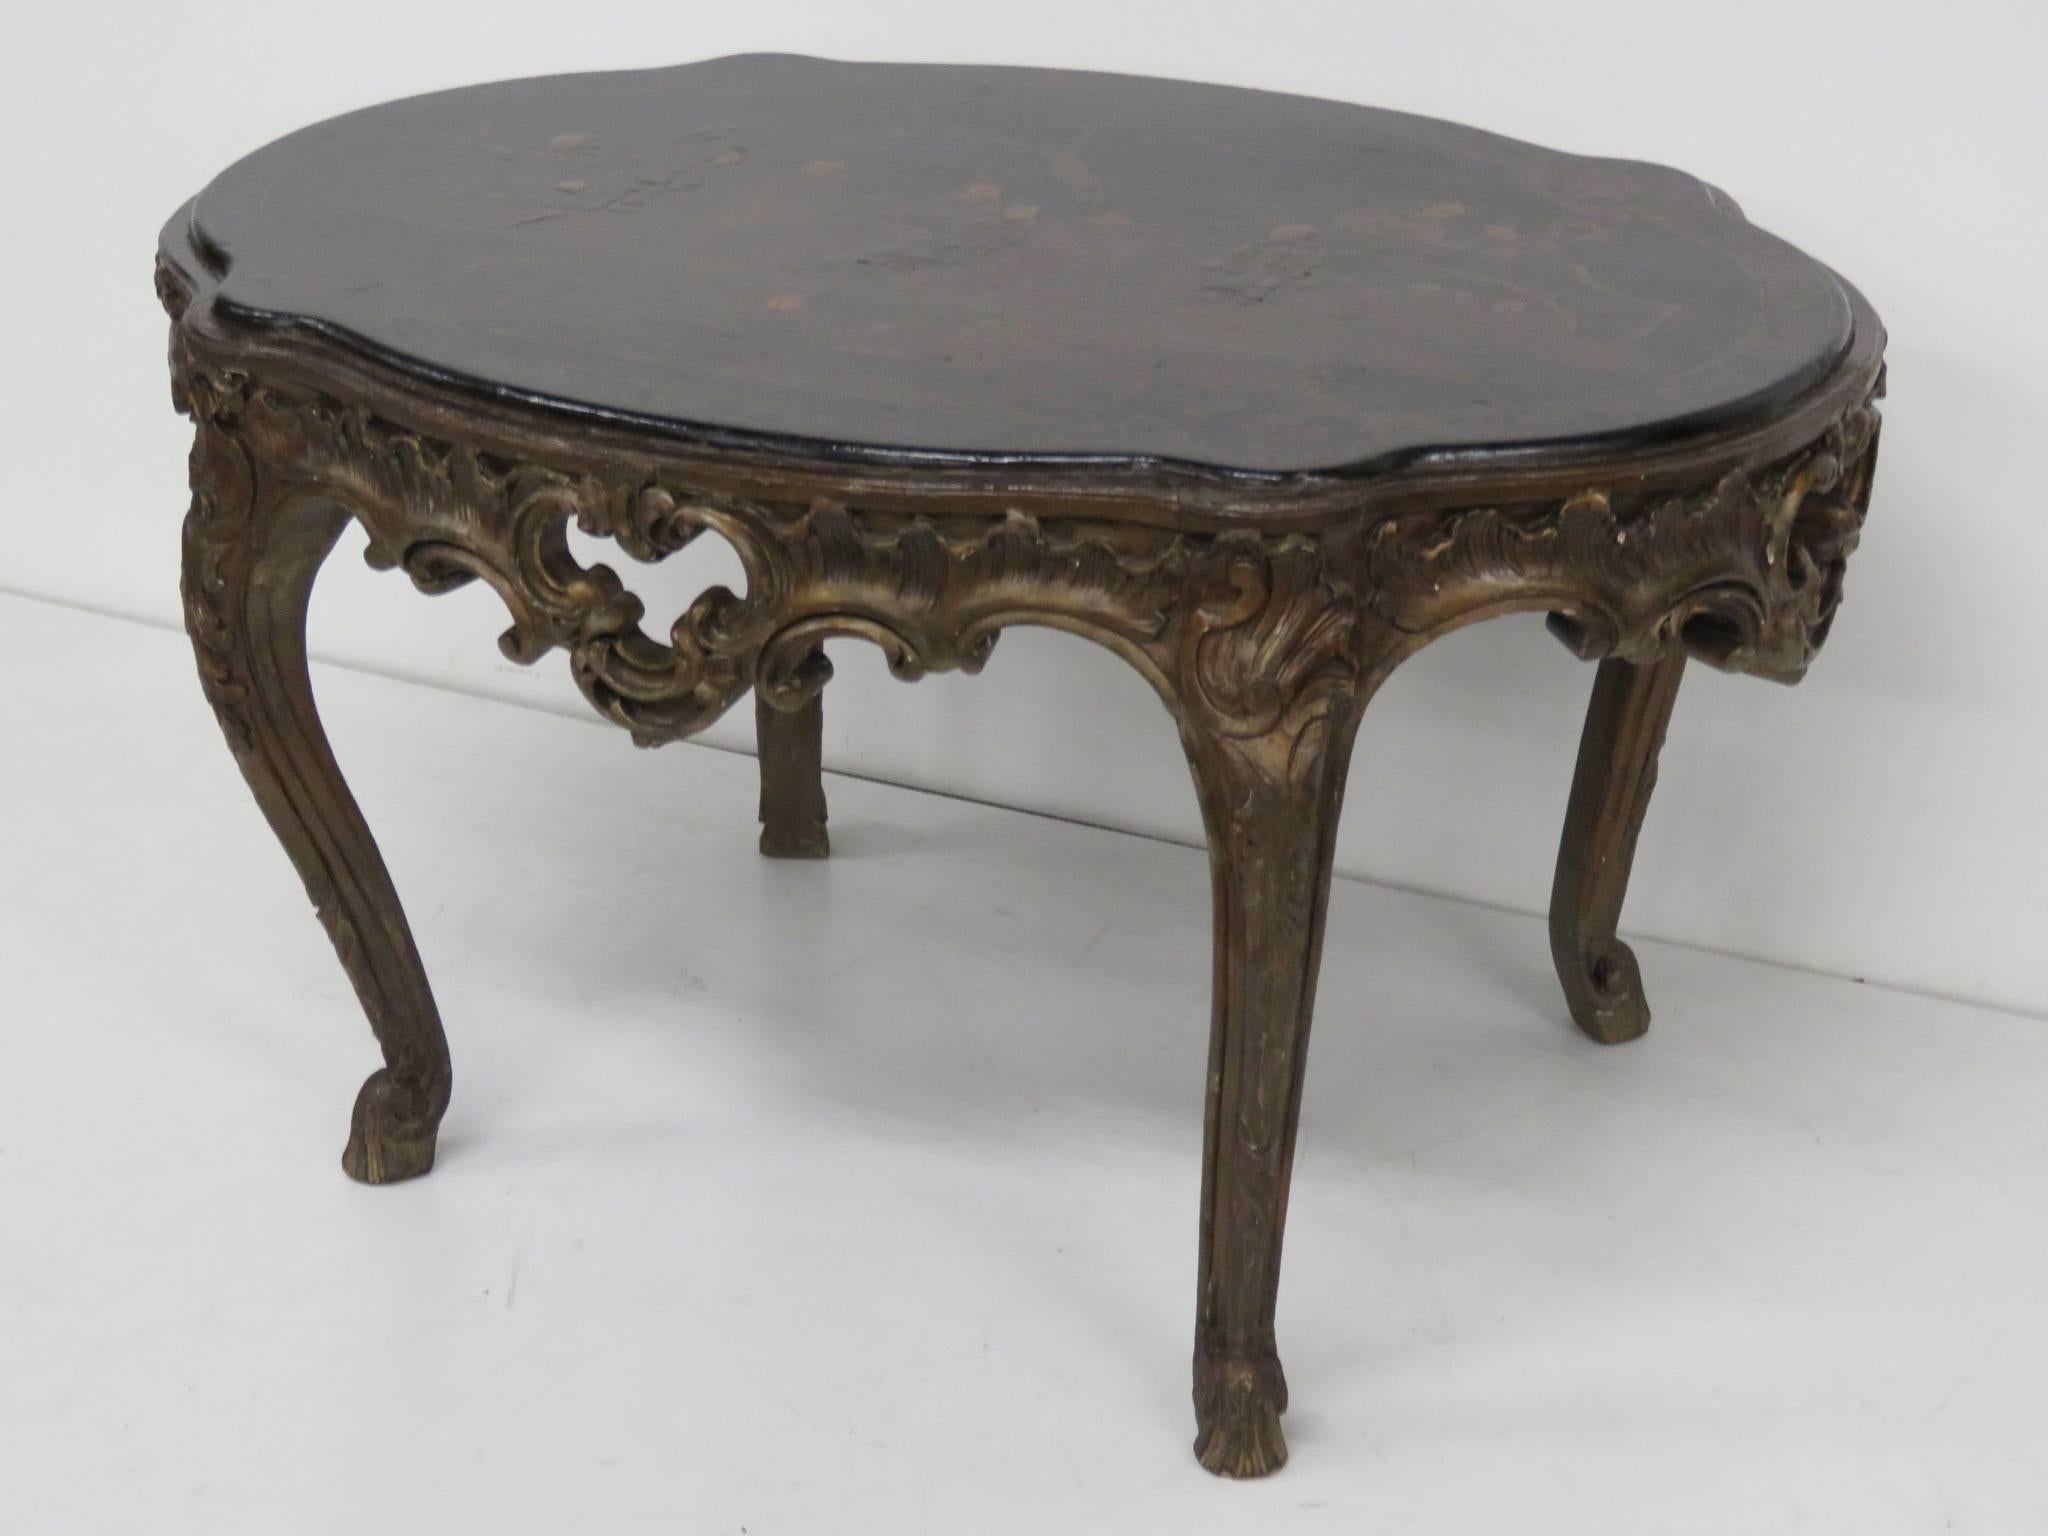 Chinoiserie decorated top with carved base.